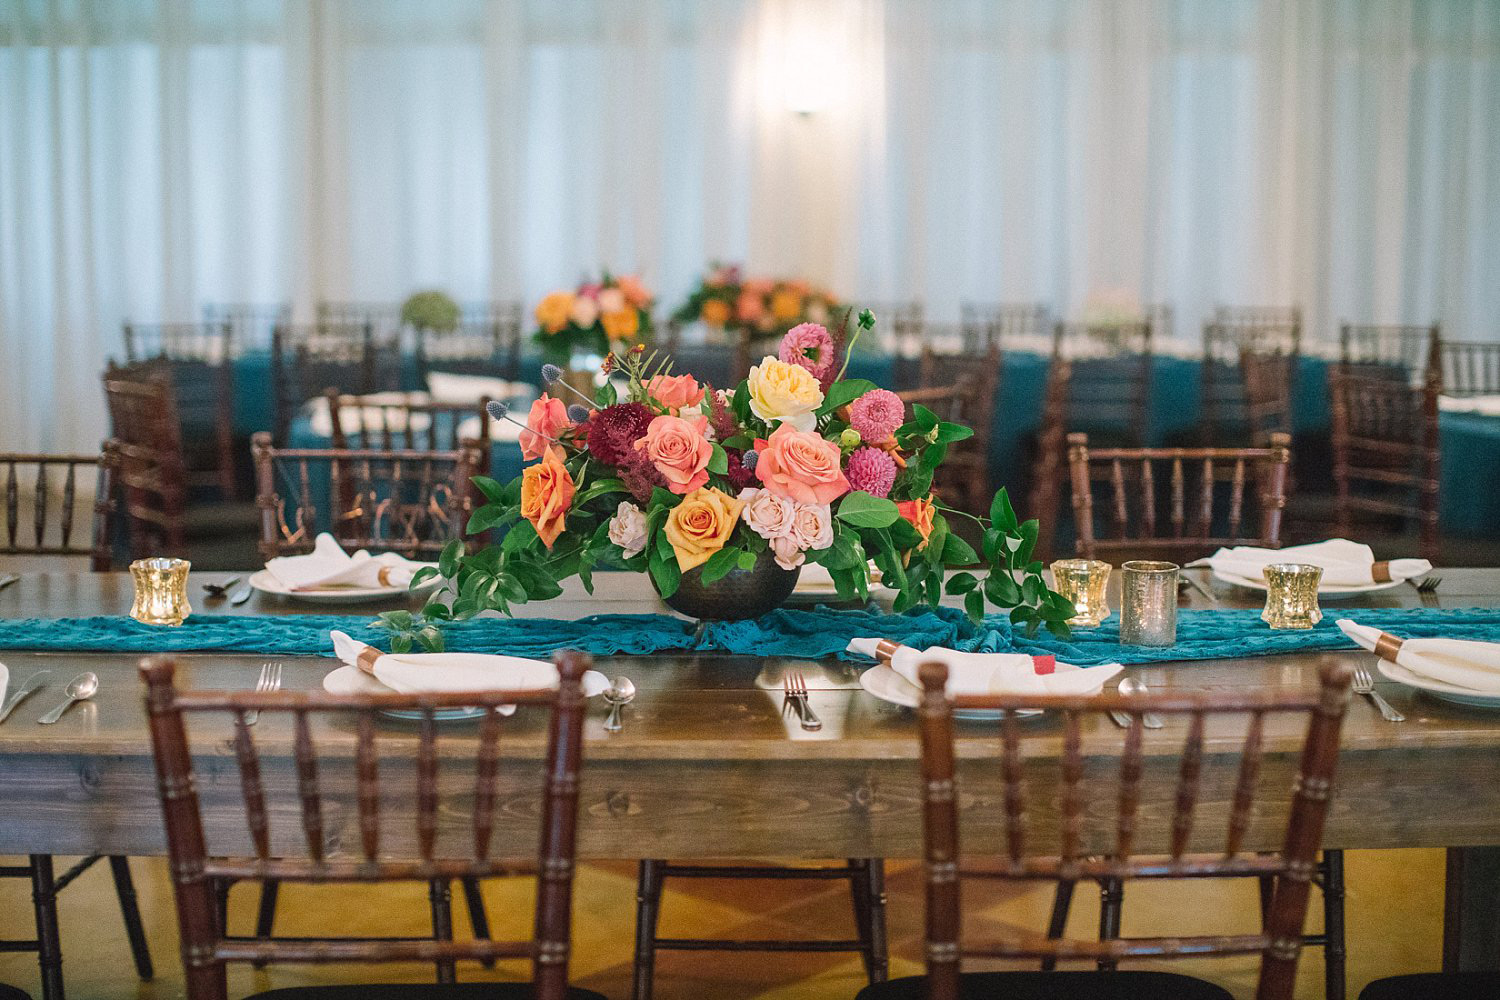 Farm table with a teal runner and colorful fall flowers